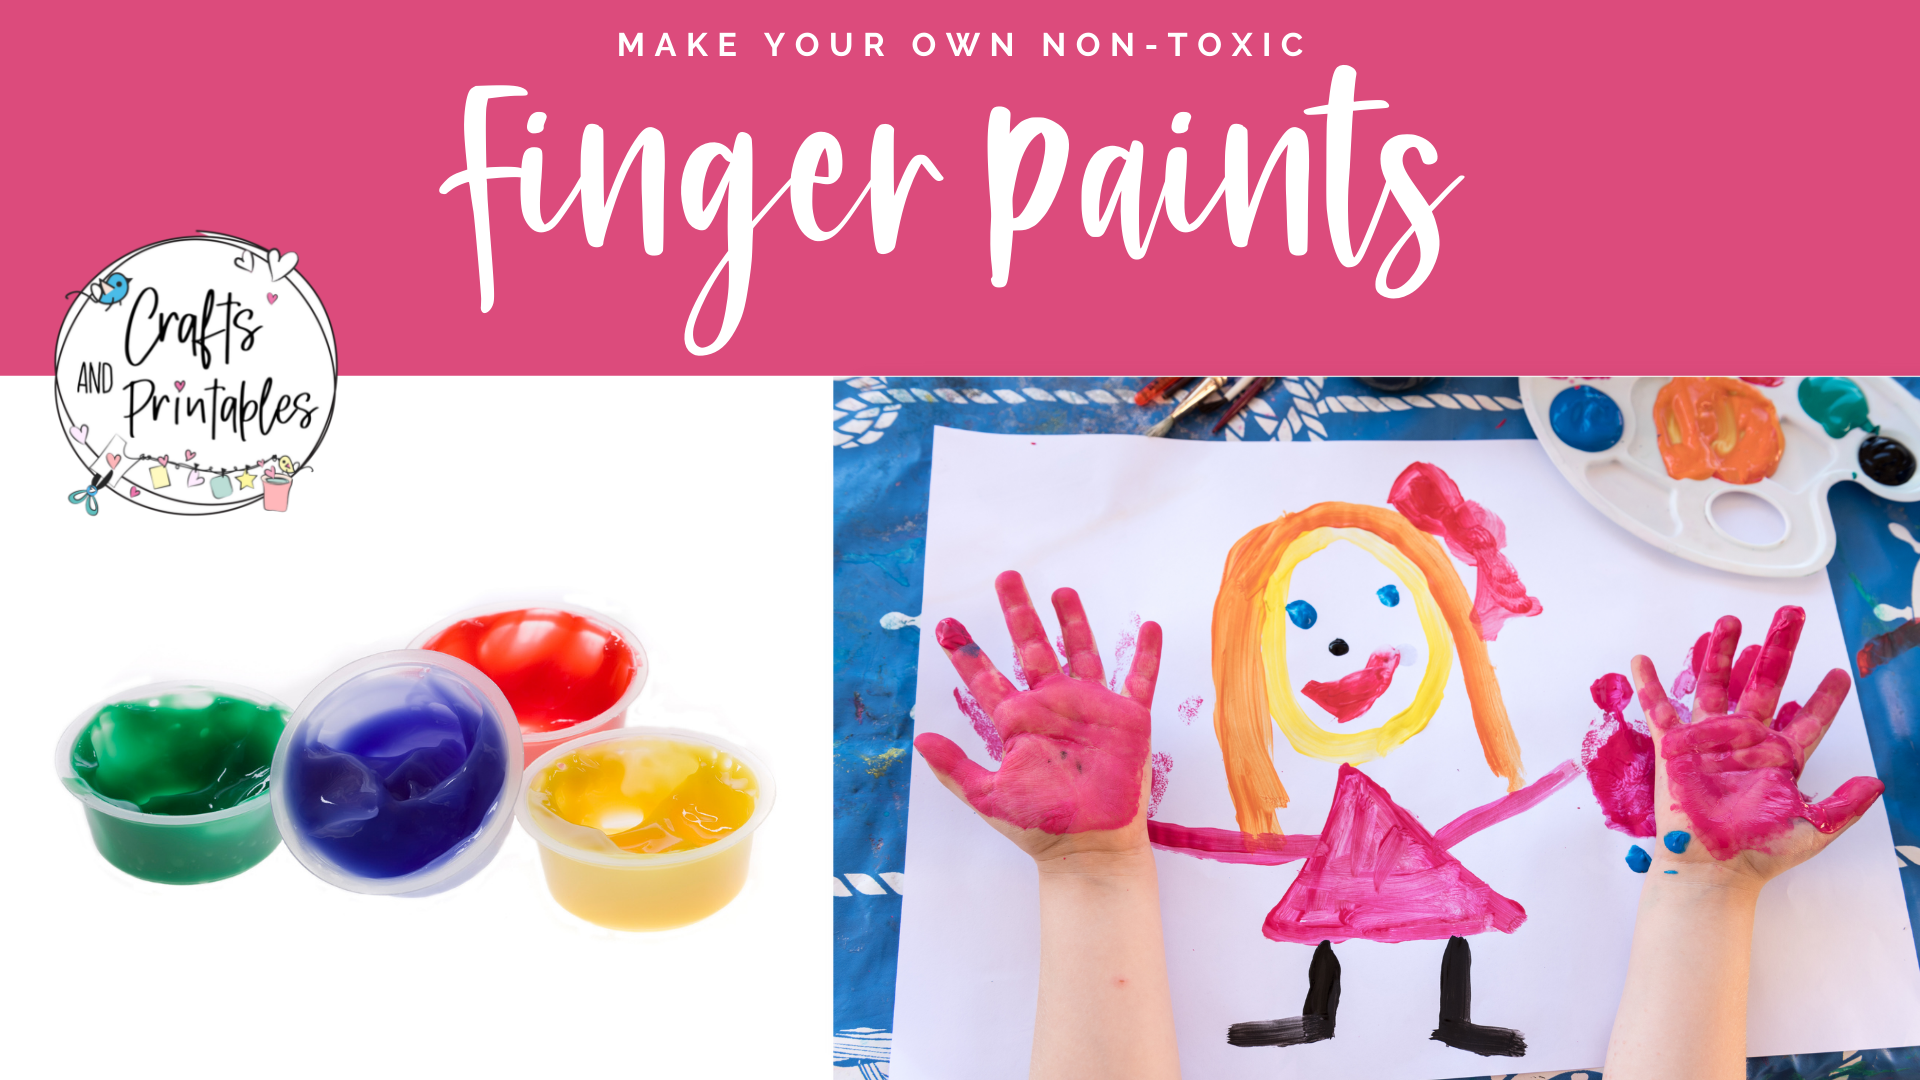 How to Make Finger Paint for Kids